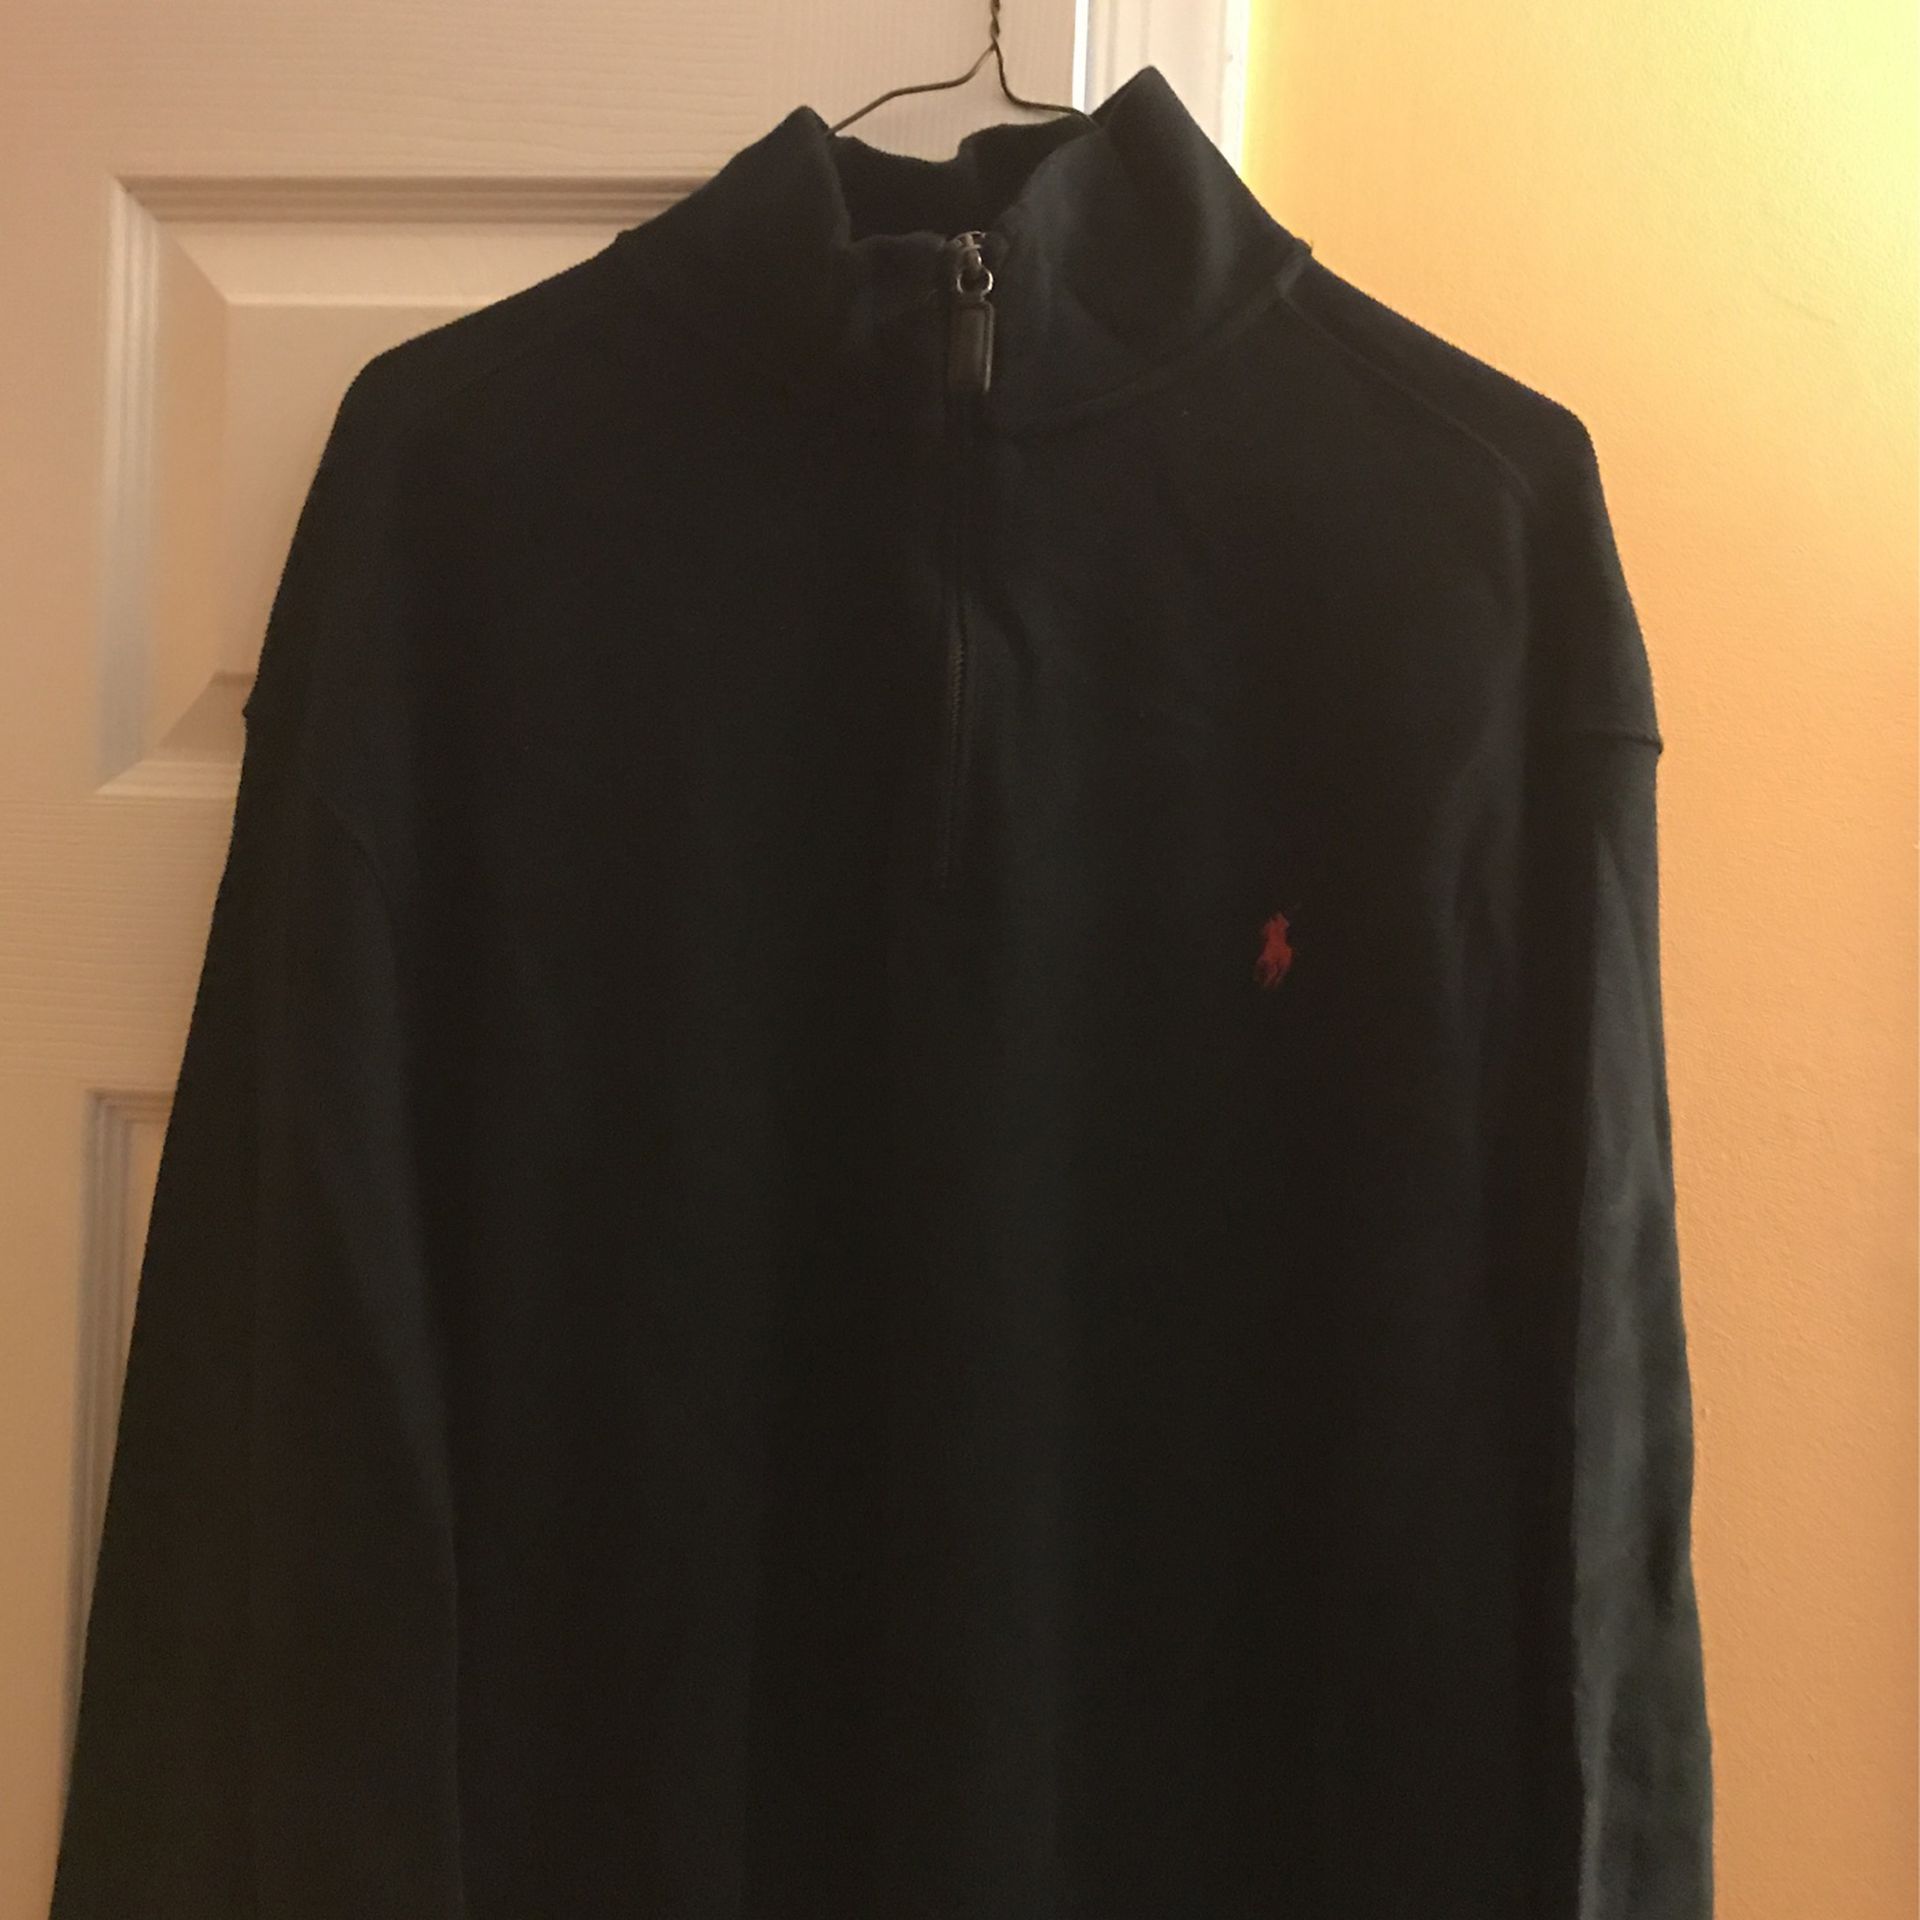 XxL Black Polo Pull Over Zip Up